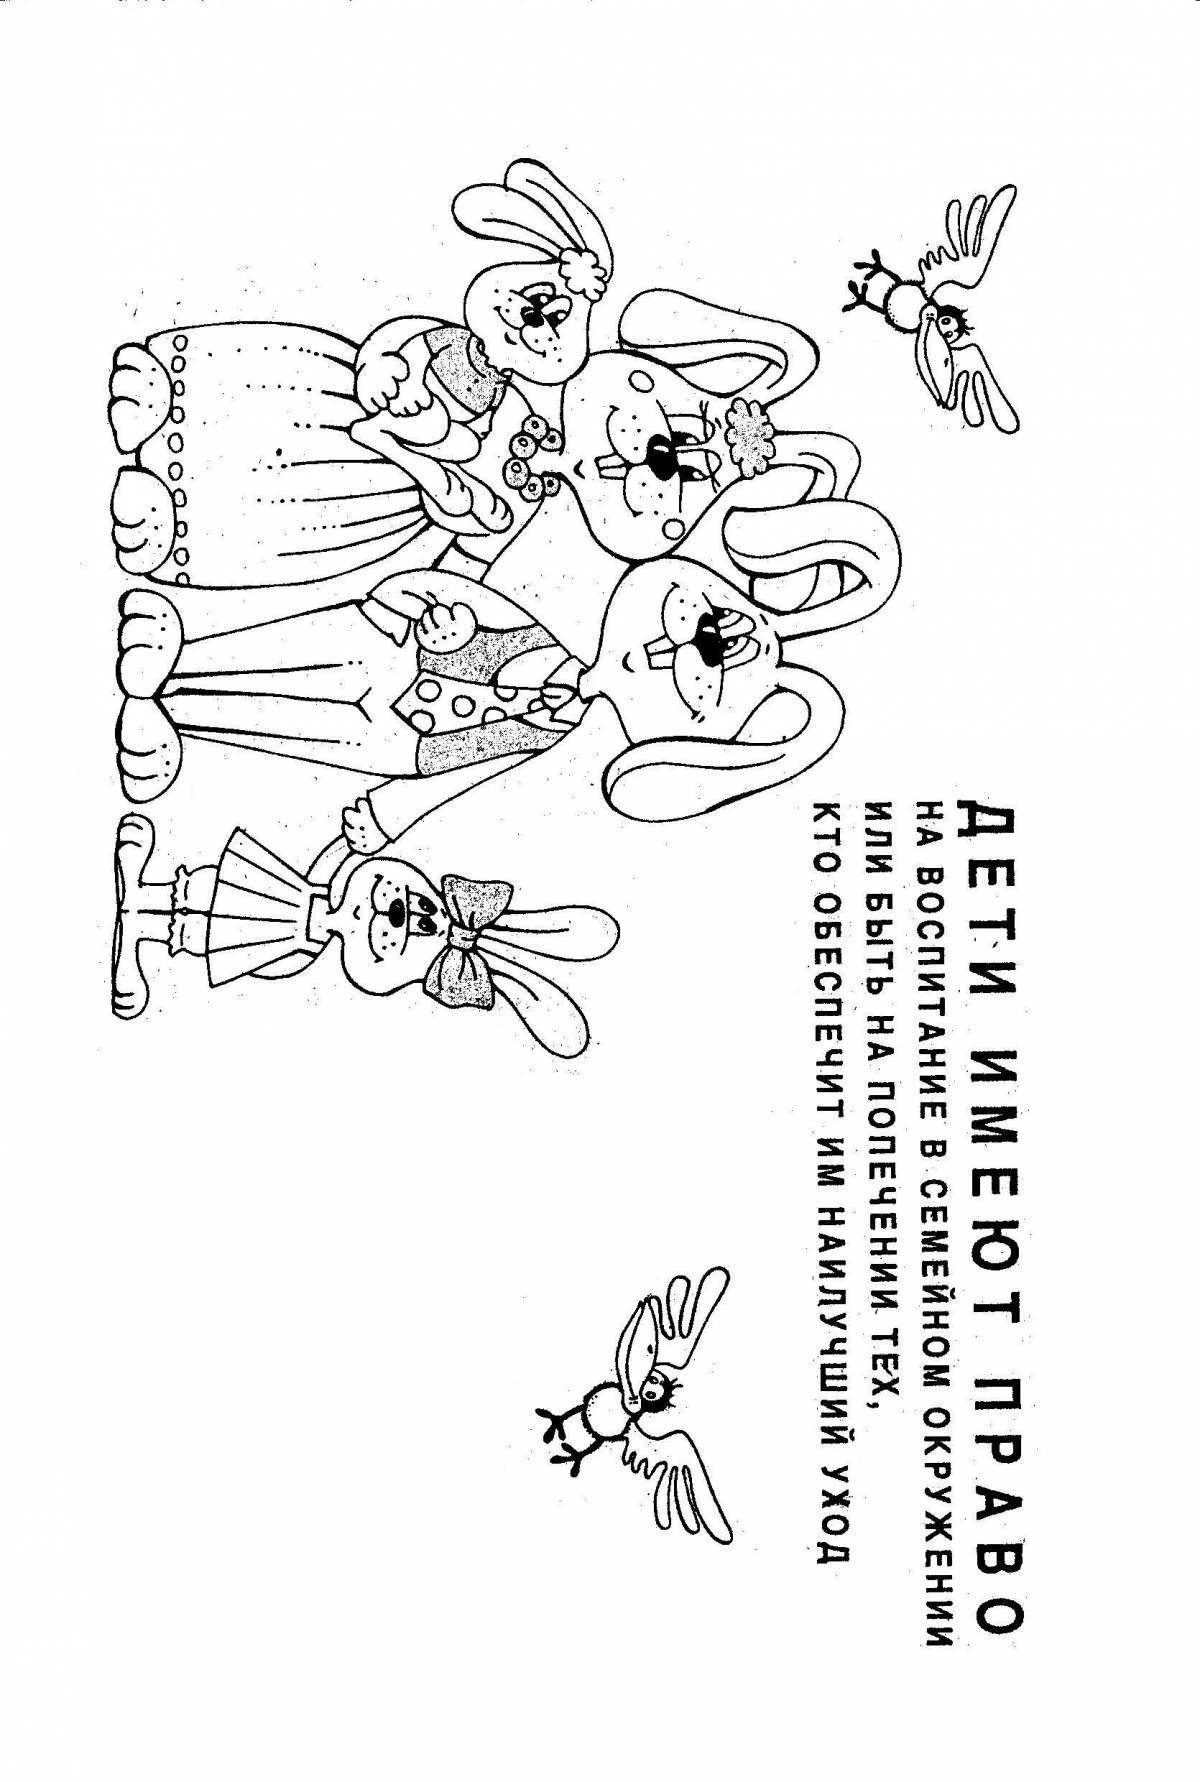 Children's rights coloring book